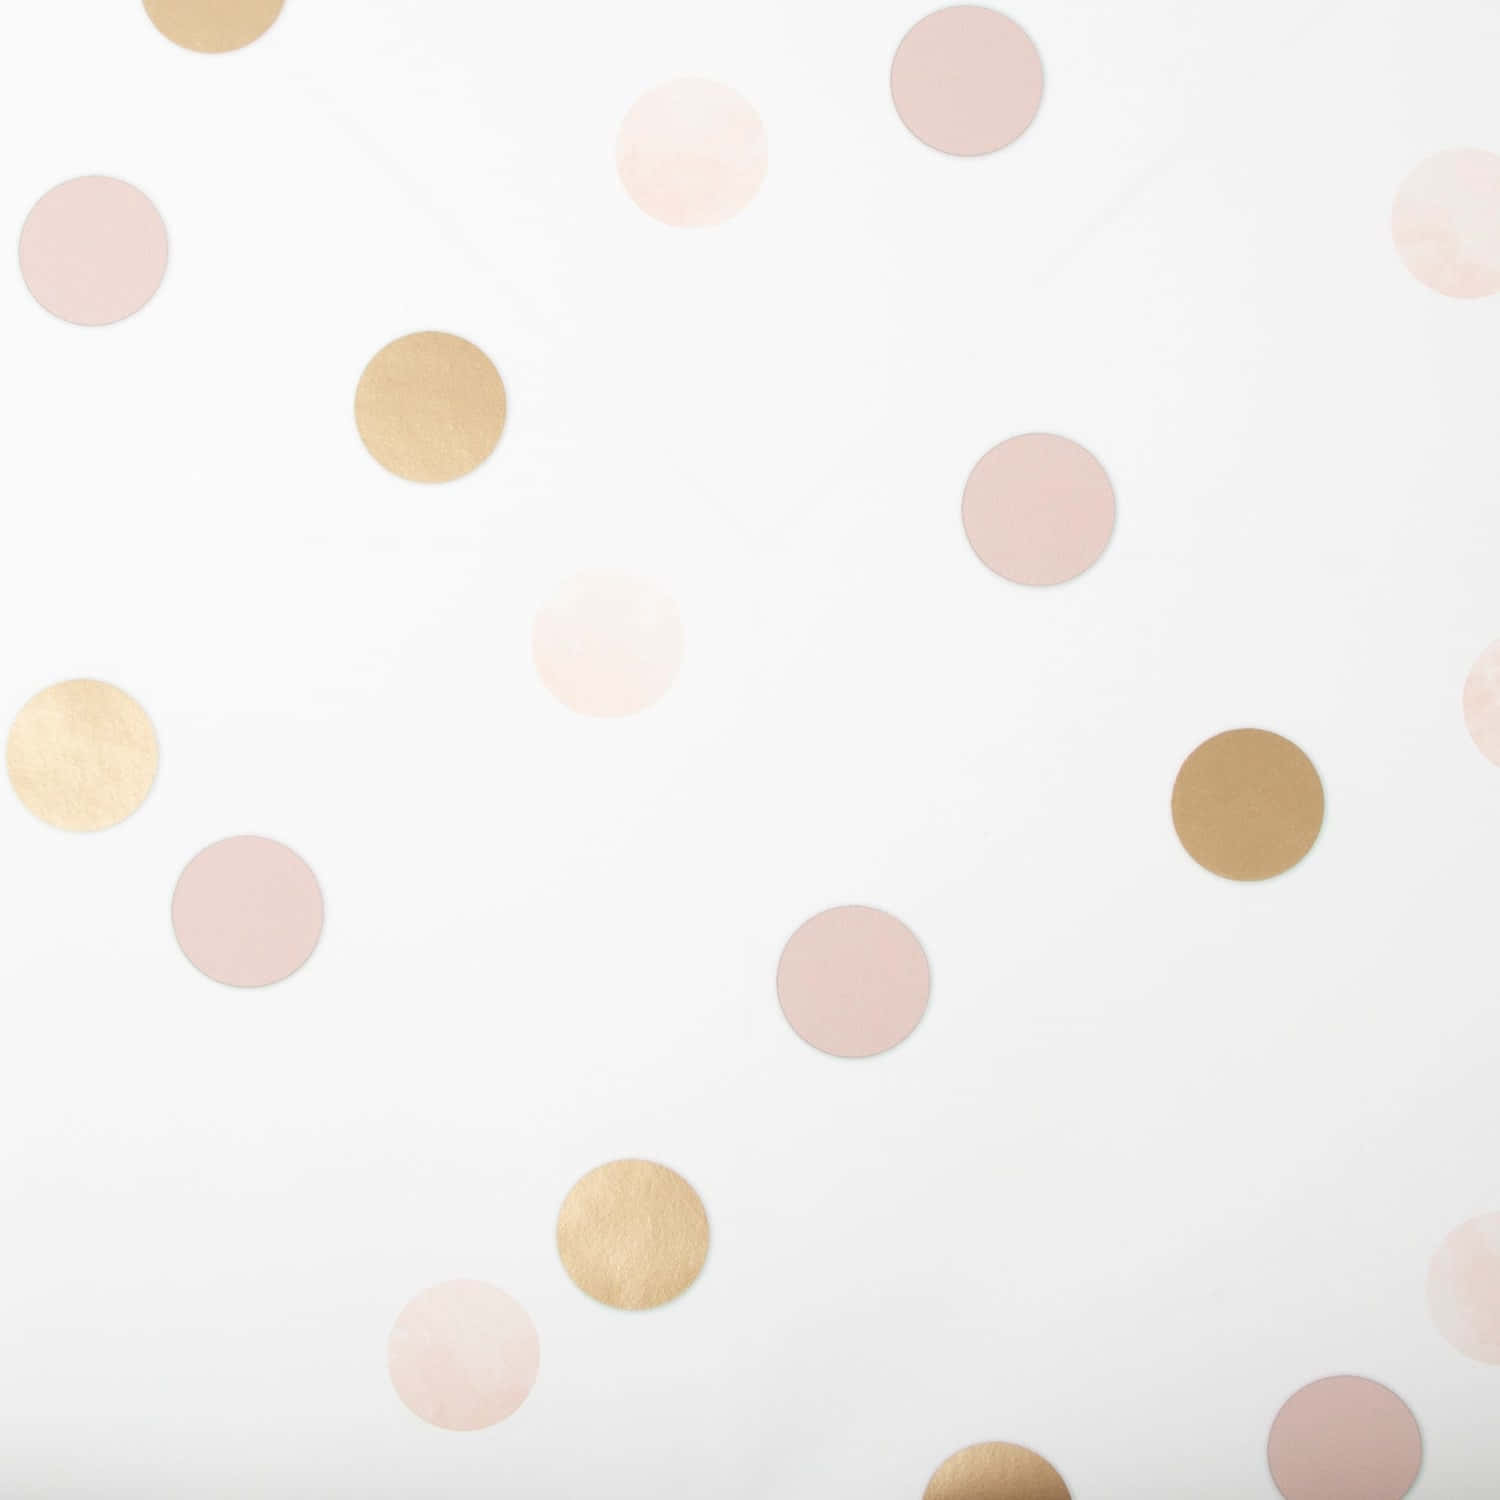 A vibrant display of a pink and white polka dot pattern Wallpaper